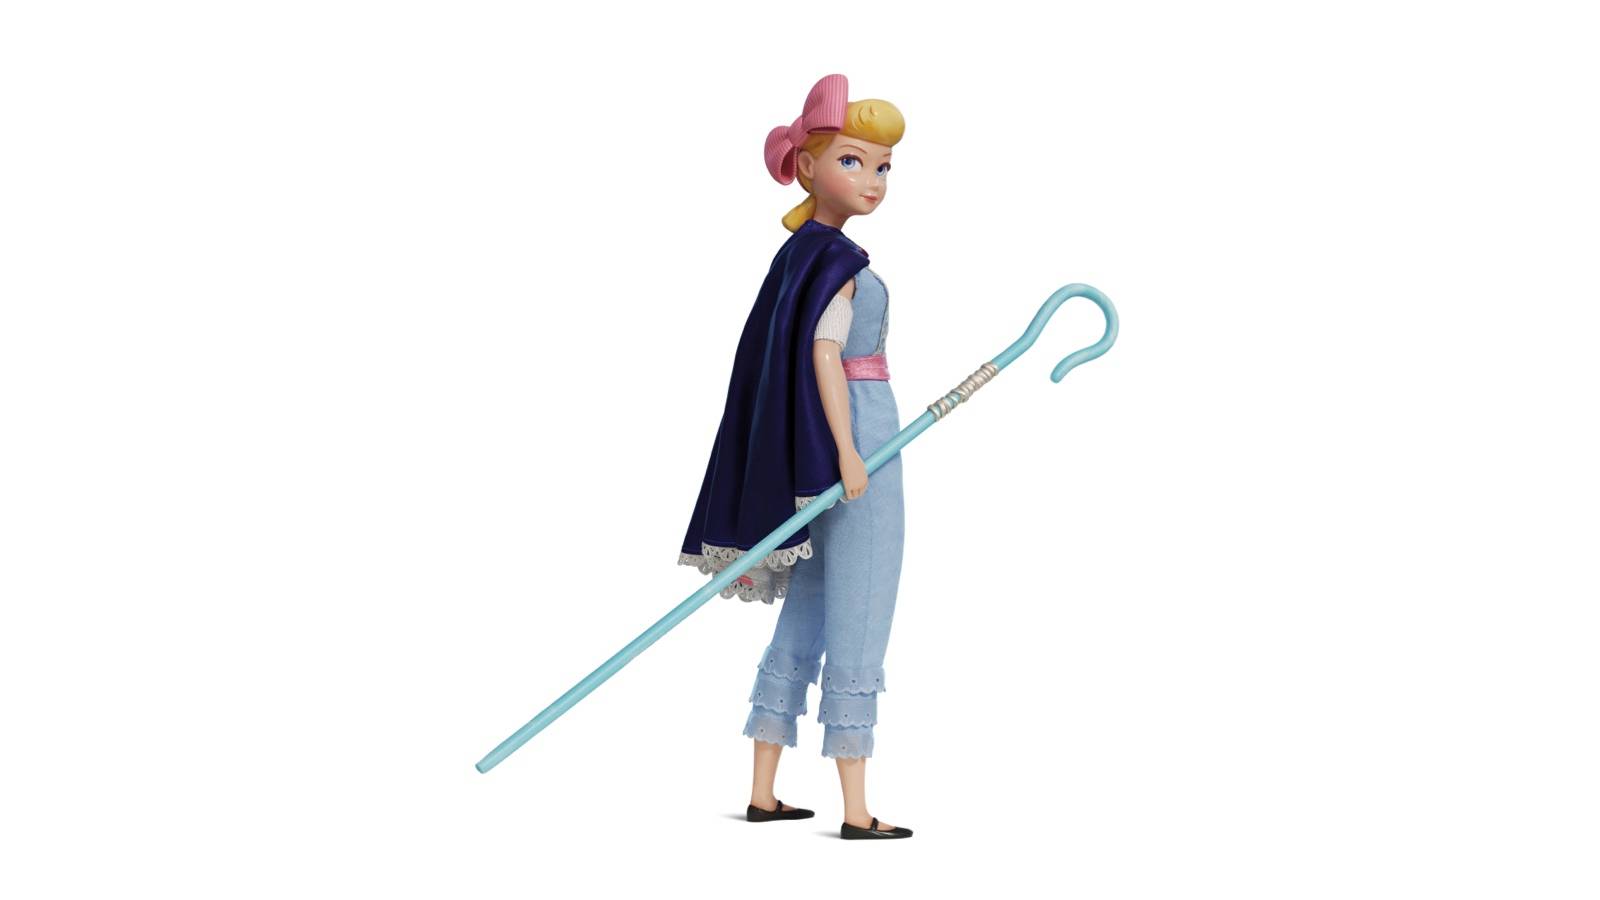 PHOTO - Bo Peep from Toy Story 4 coming to Toy Story Land at Disney's Hollywood Studios